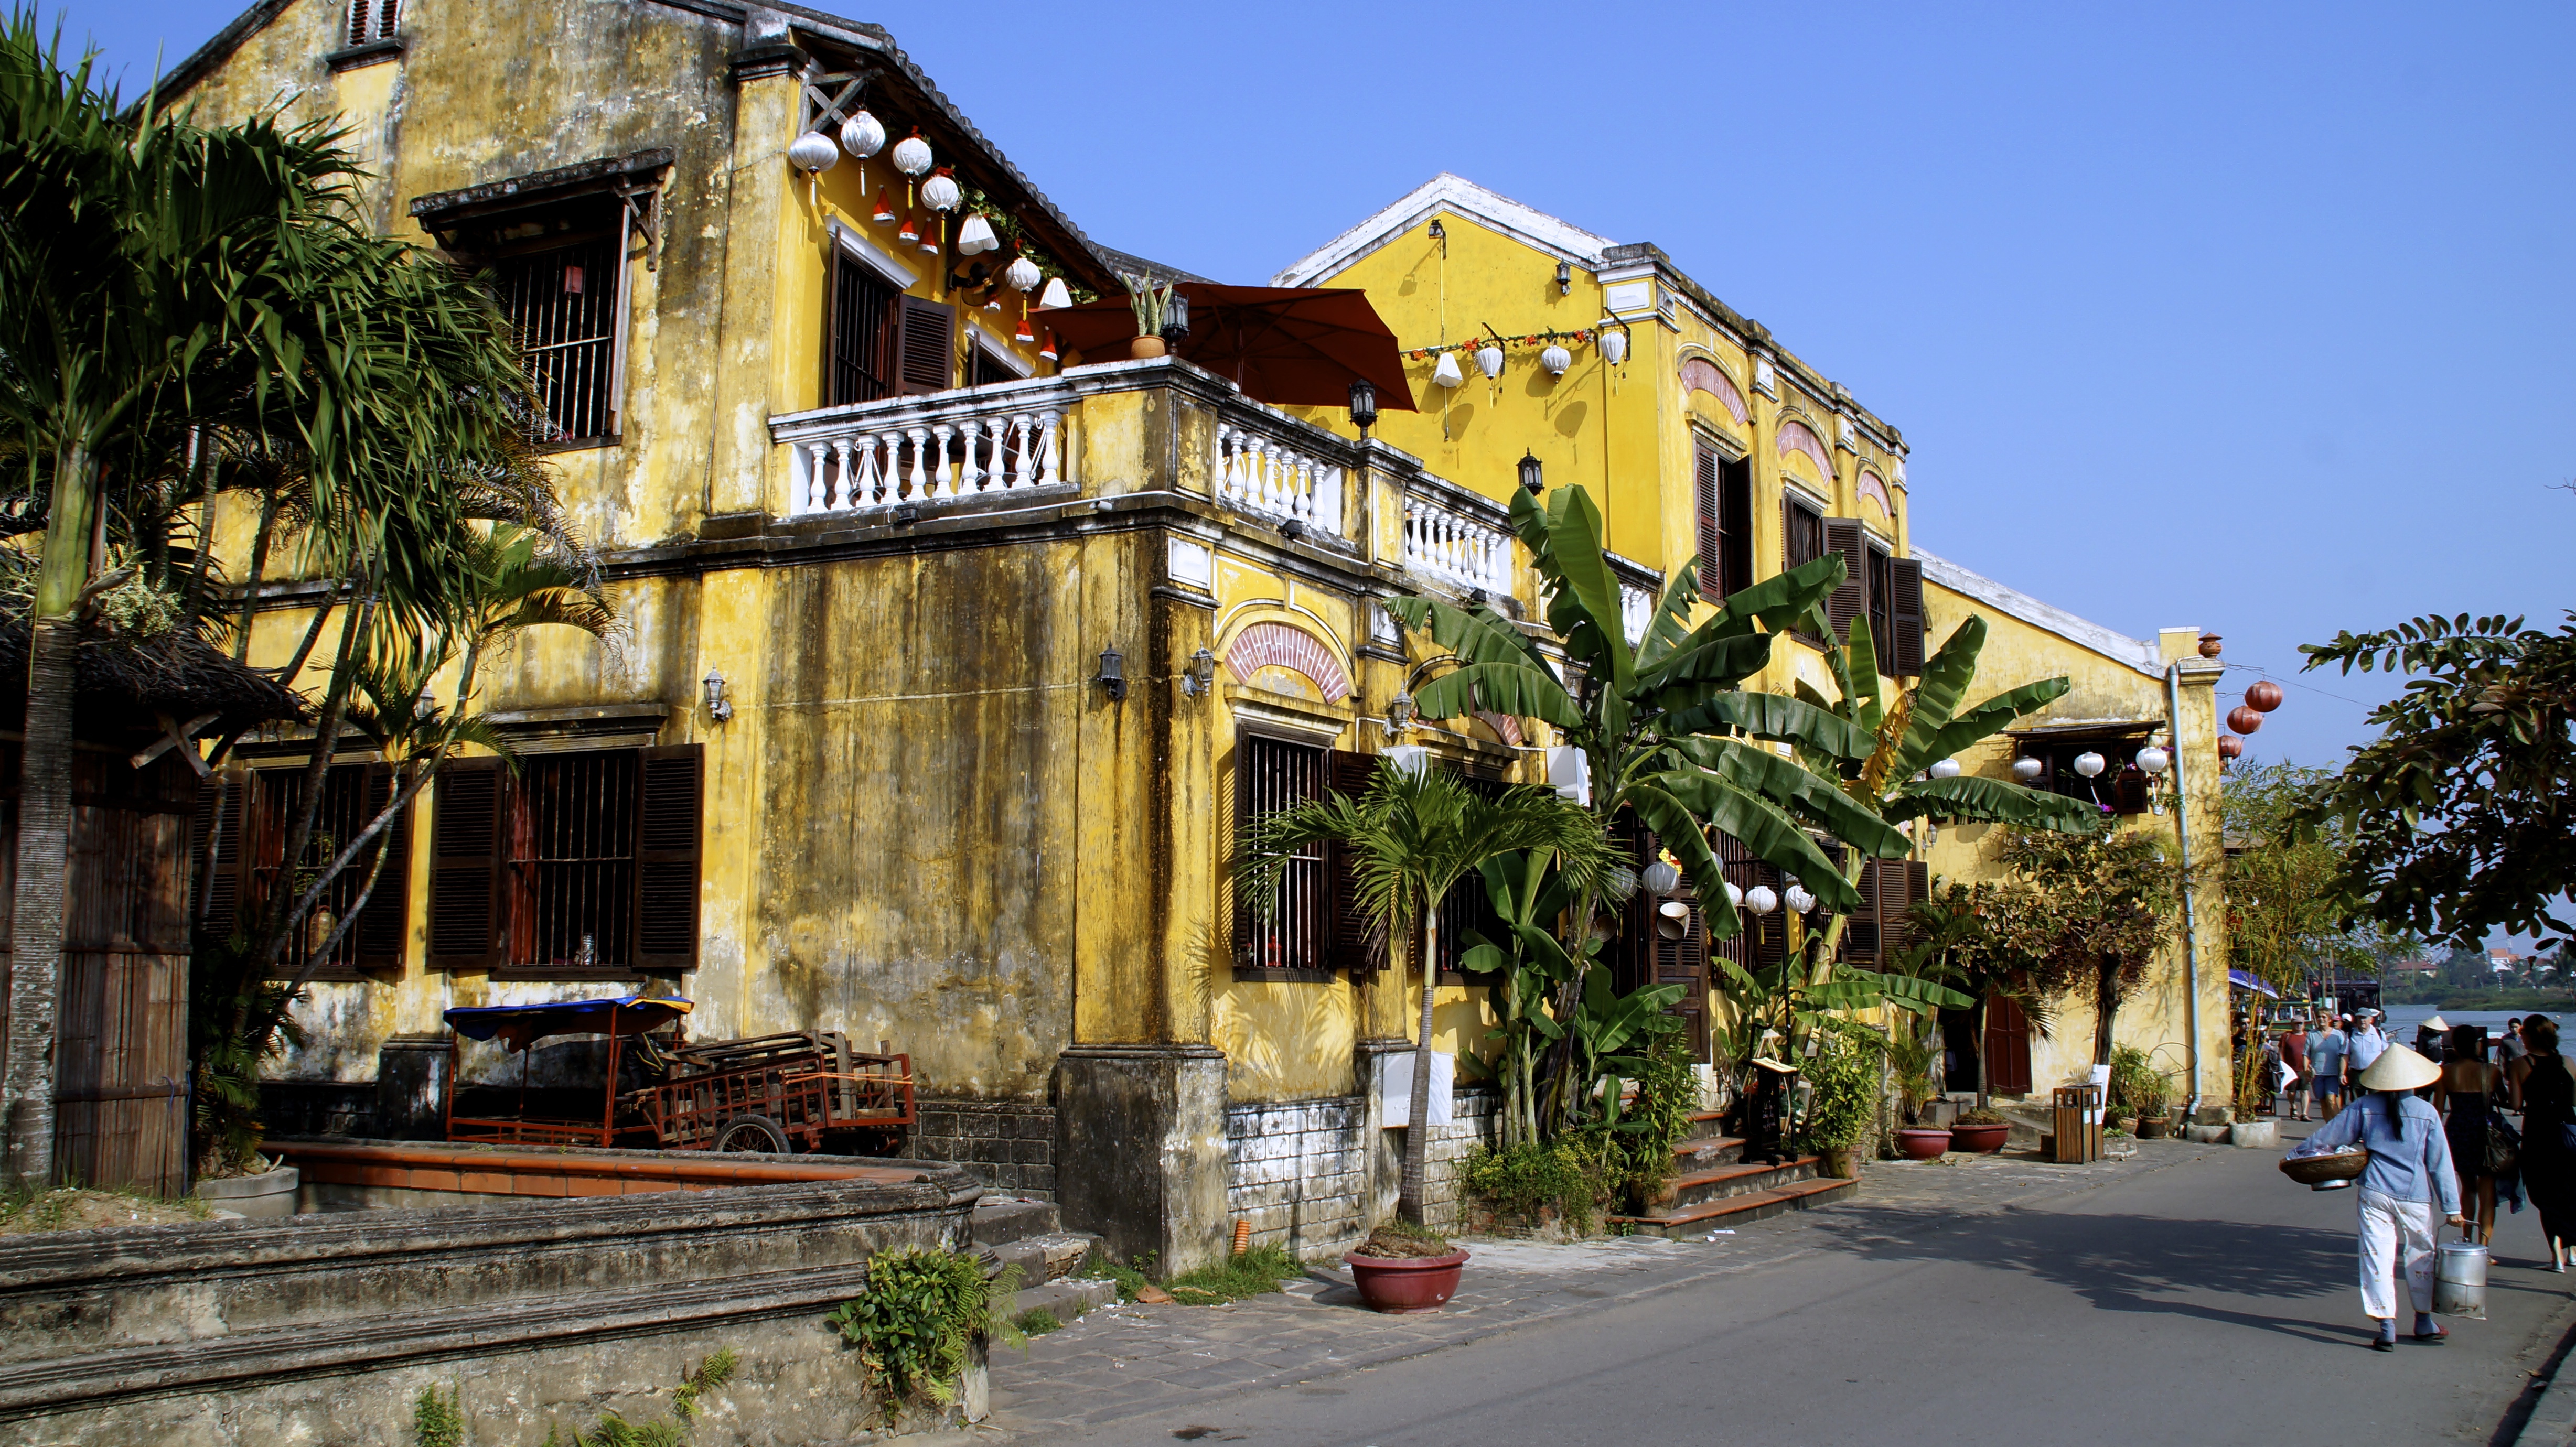 Architectural Styles of Hoi An